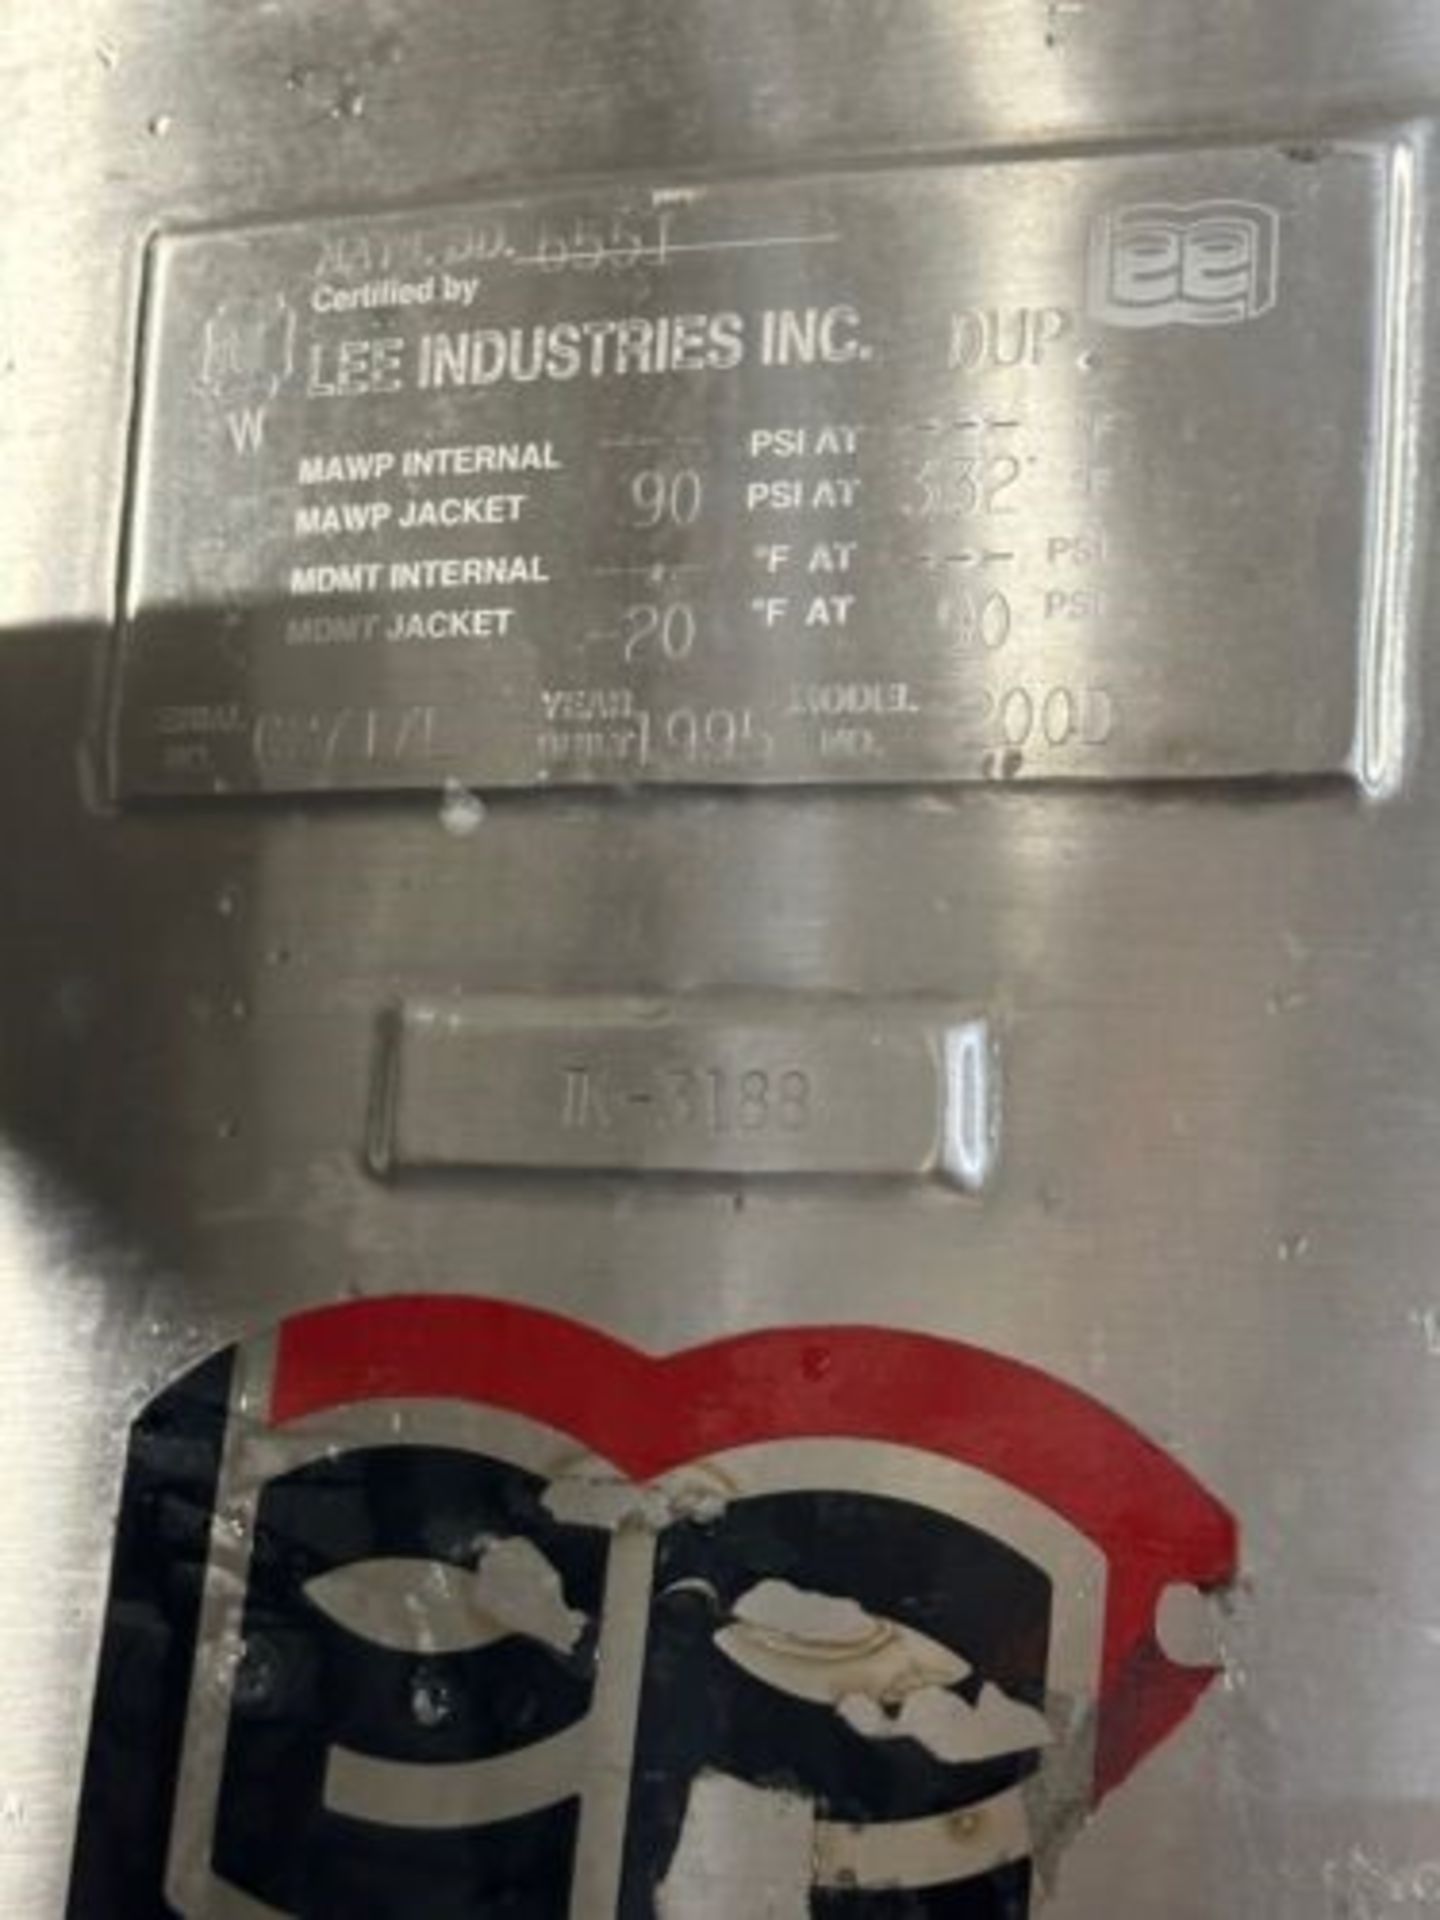 Lee 200 Gallon Kettle, Stainless Steel, Last Used in Cosmetics (Loading Fee $500) (Located FOB - Image 3 of 3